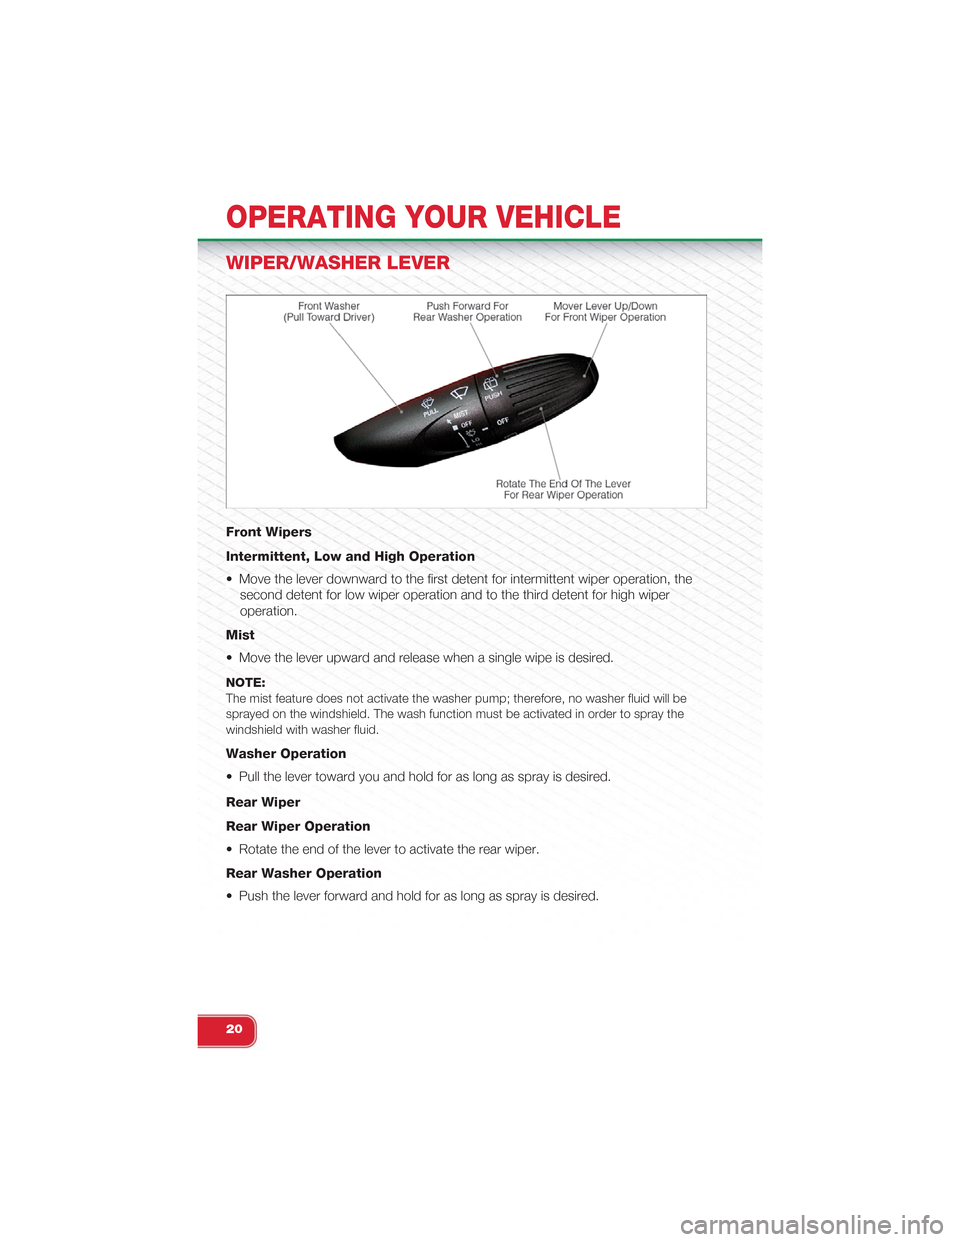 FIAT 500 ABARTH 2013 2.G User Guide WIPER/WASHER LEVER
Front Wipers
Intermittent, Low and High Operation
• Move the lever downward to the first detent for intermittent wiper operation, the
second detent for low wiper operation and to 